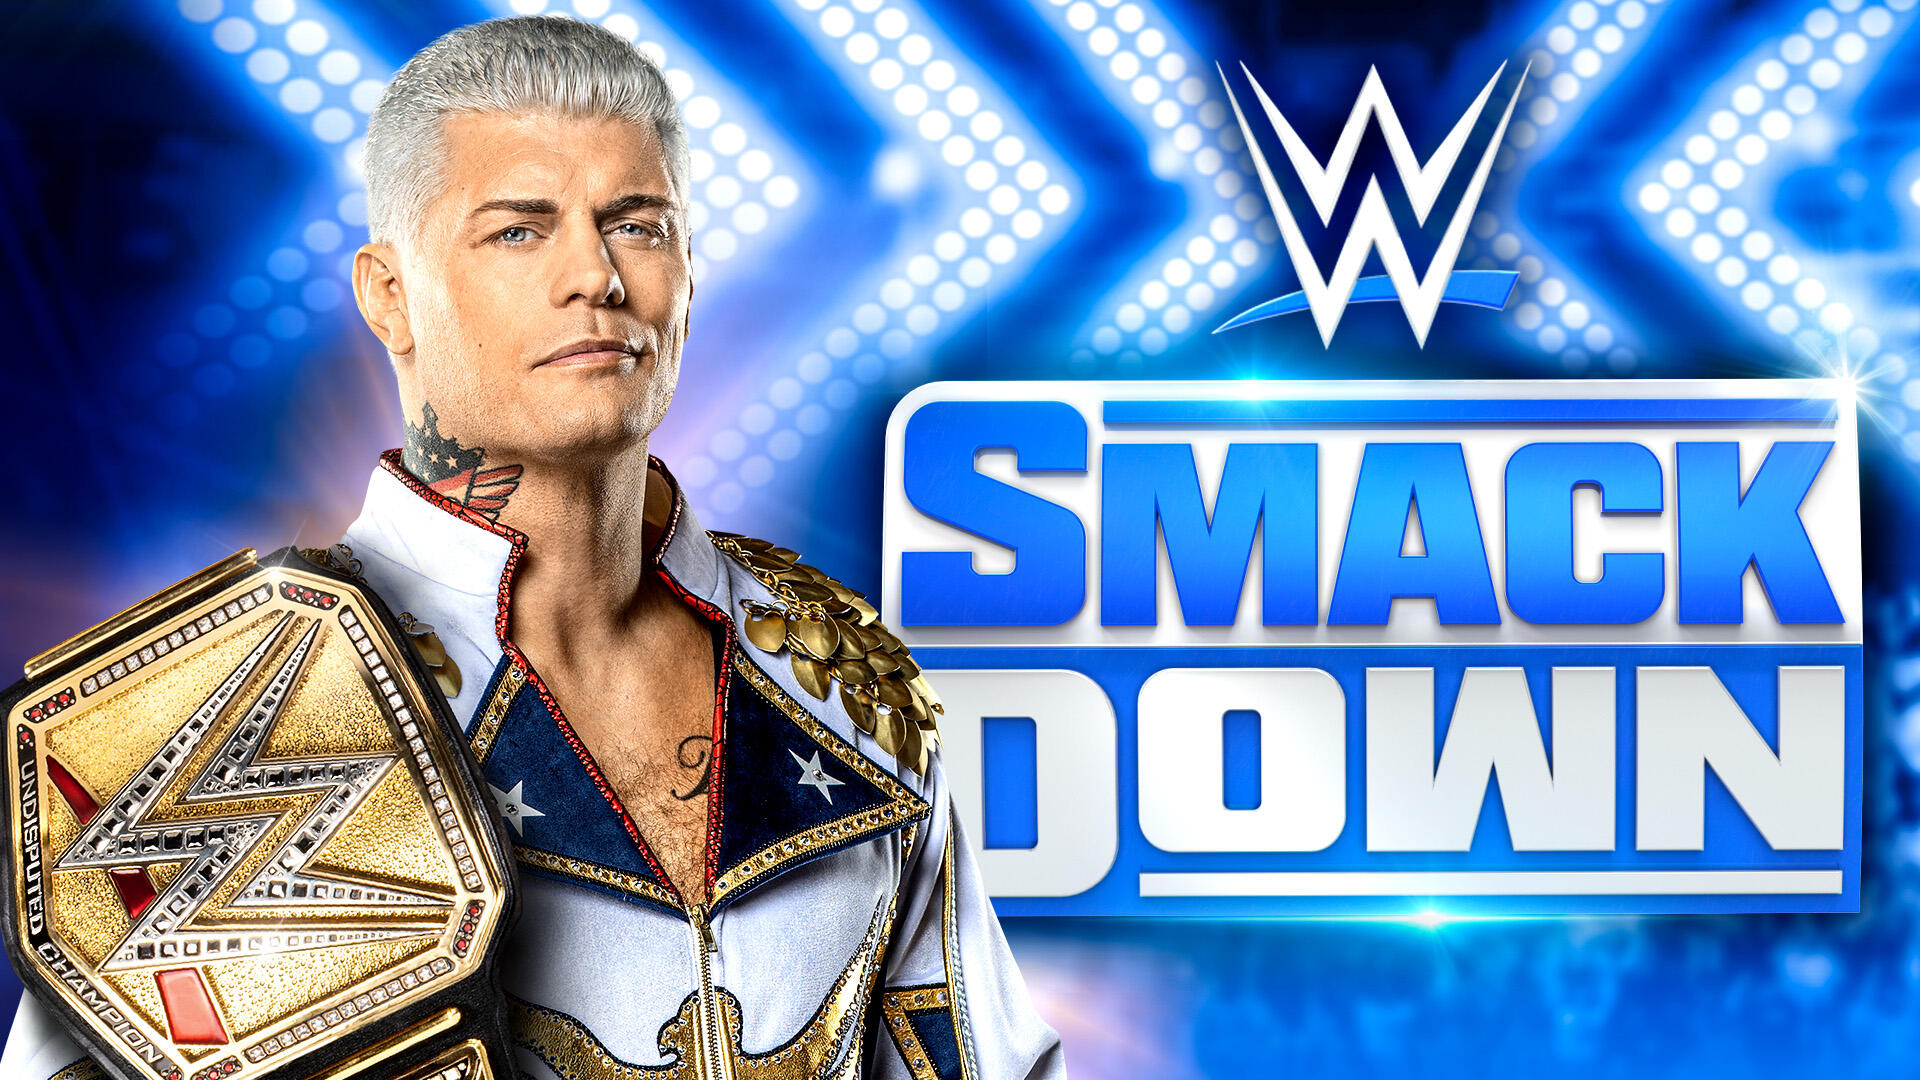 The Names of WWE SmackDown’s Producers Have Been Disclosed